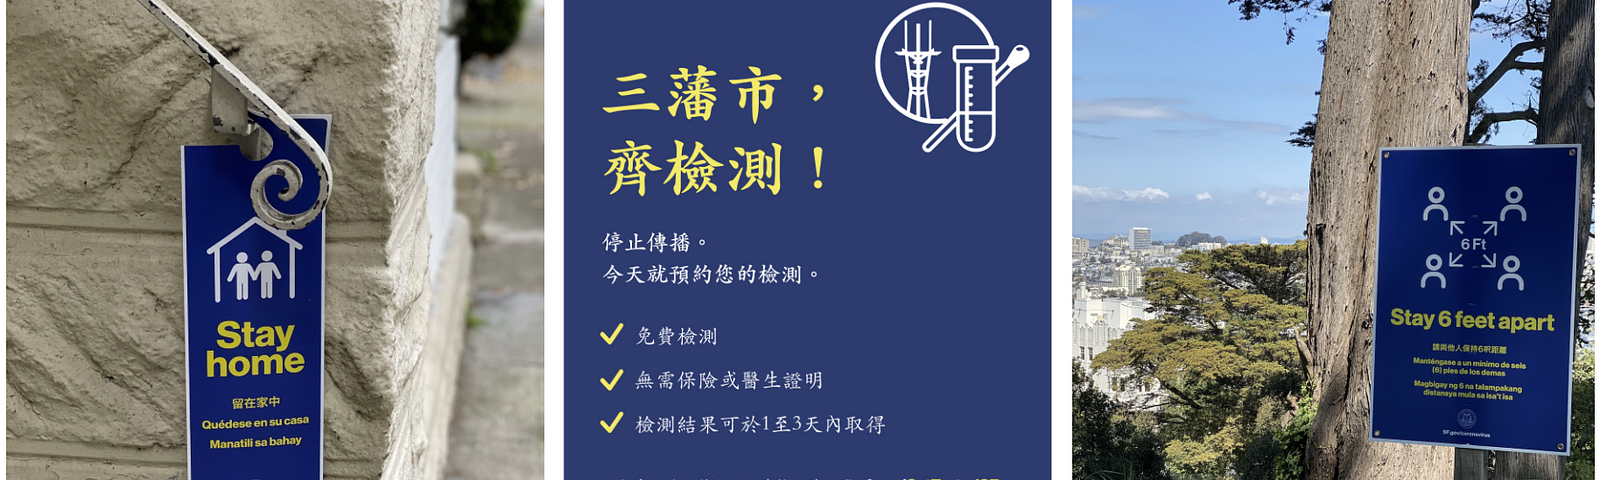 Three different posters about what to do during COVID-19. One is in Chinese.